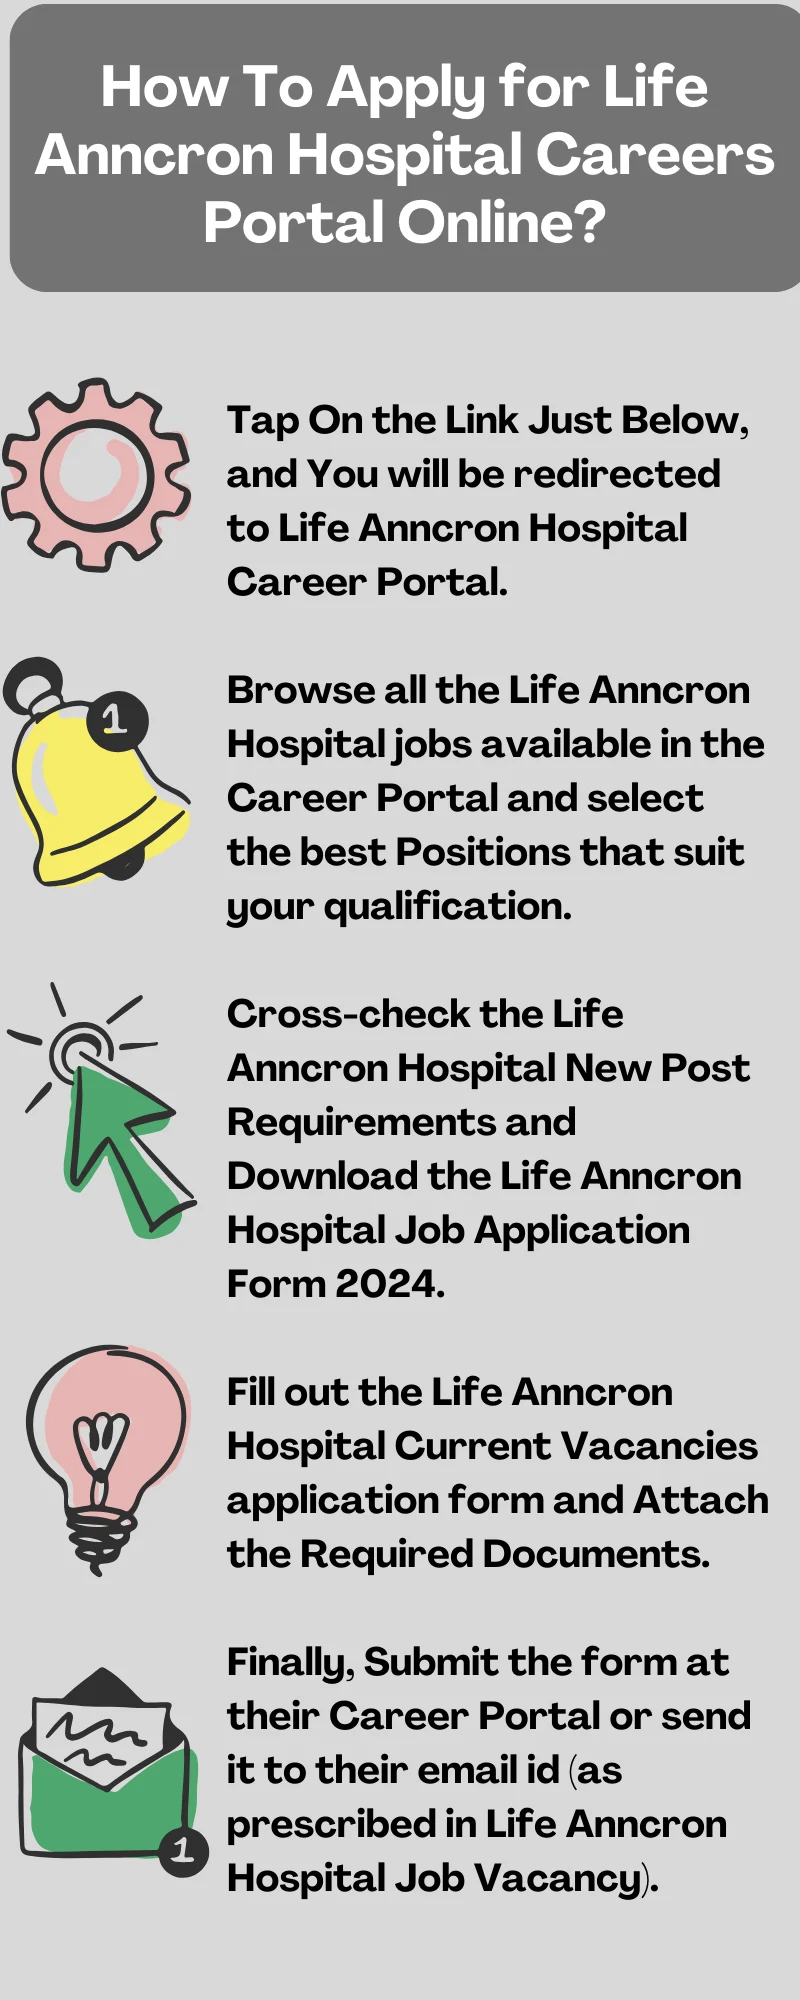 How To Apply for Life Anncron Hospital Careers Portal Online?